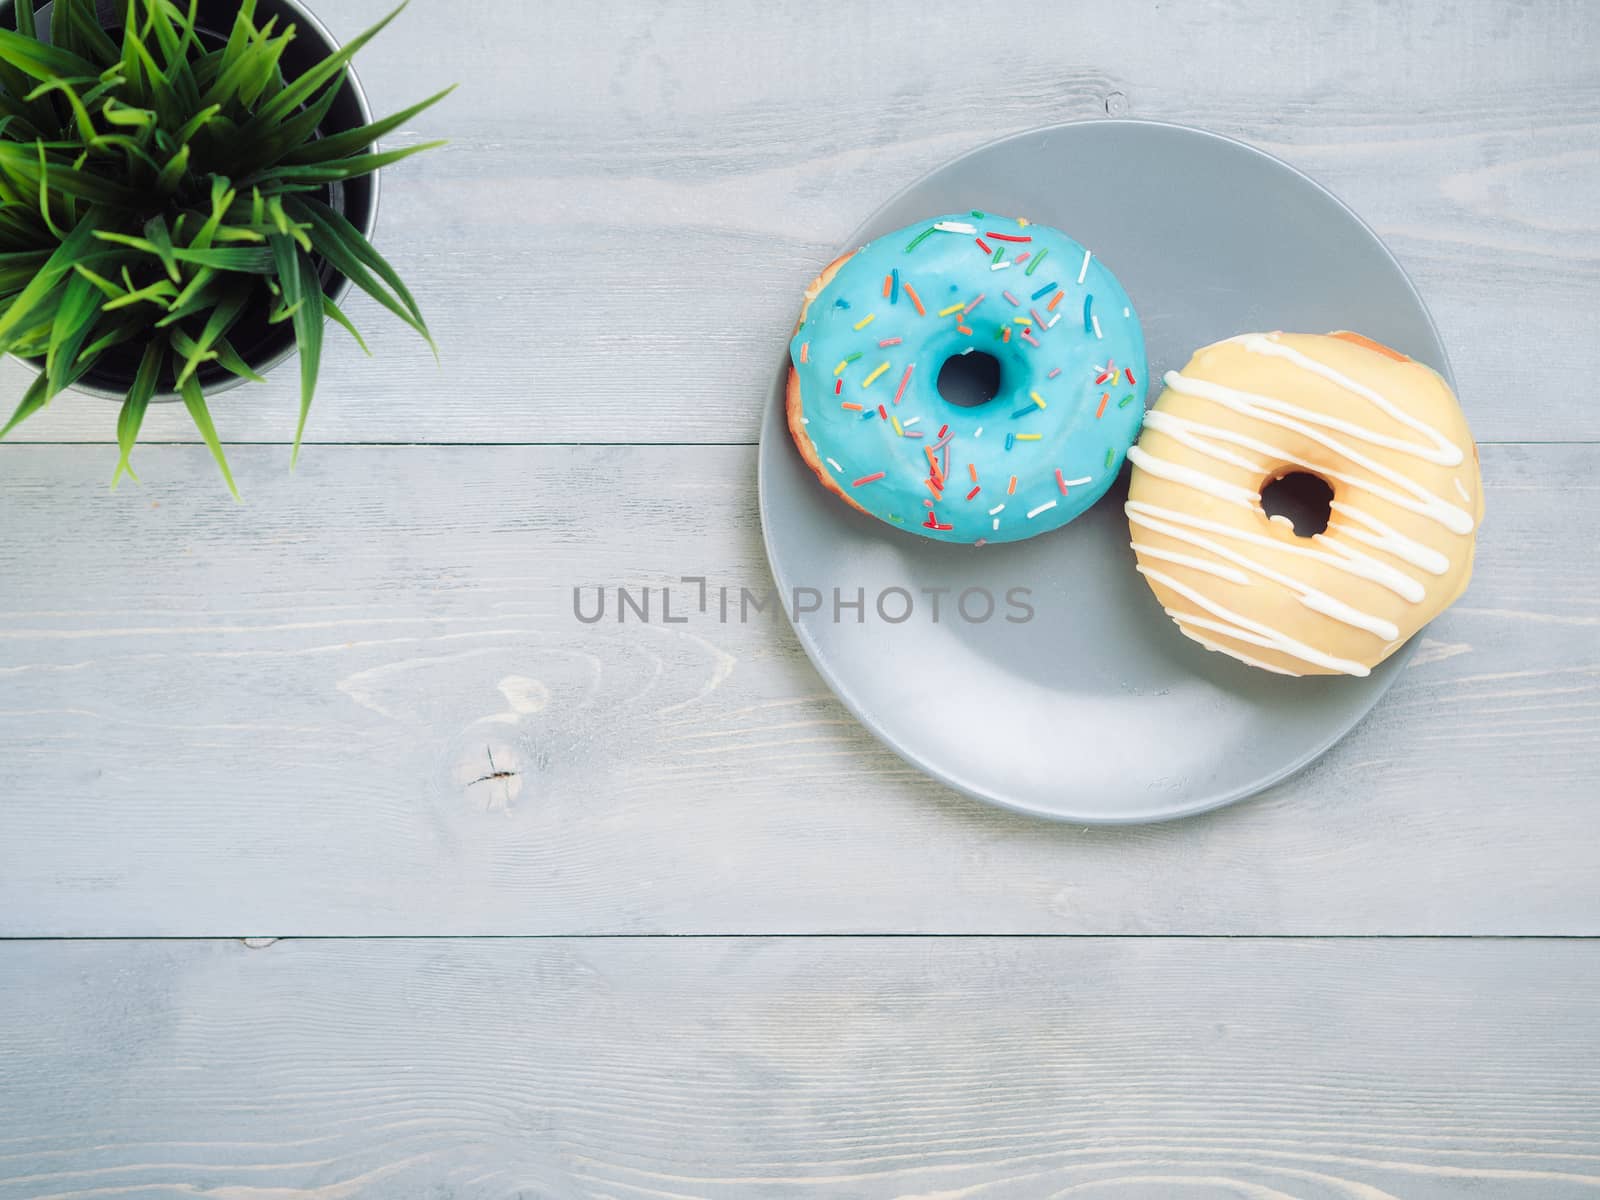 Top view of two donuts on gray wooden background with copy space. Colorful donuts on plate with copyspace. Glazed doughnuts with sprinkles on grey wooden table. Smile sign, good morning concept